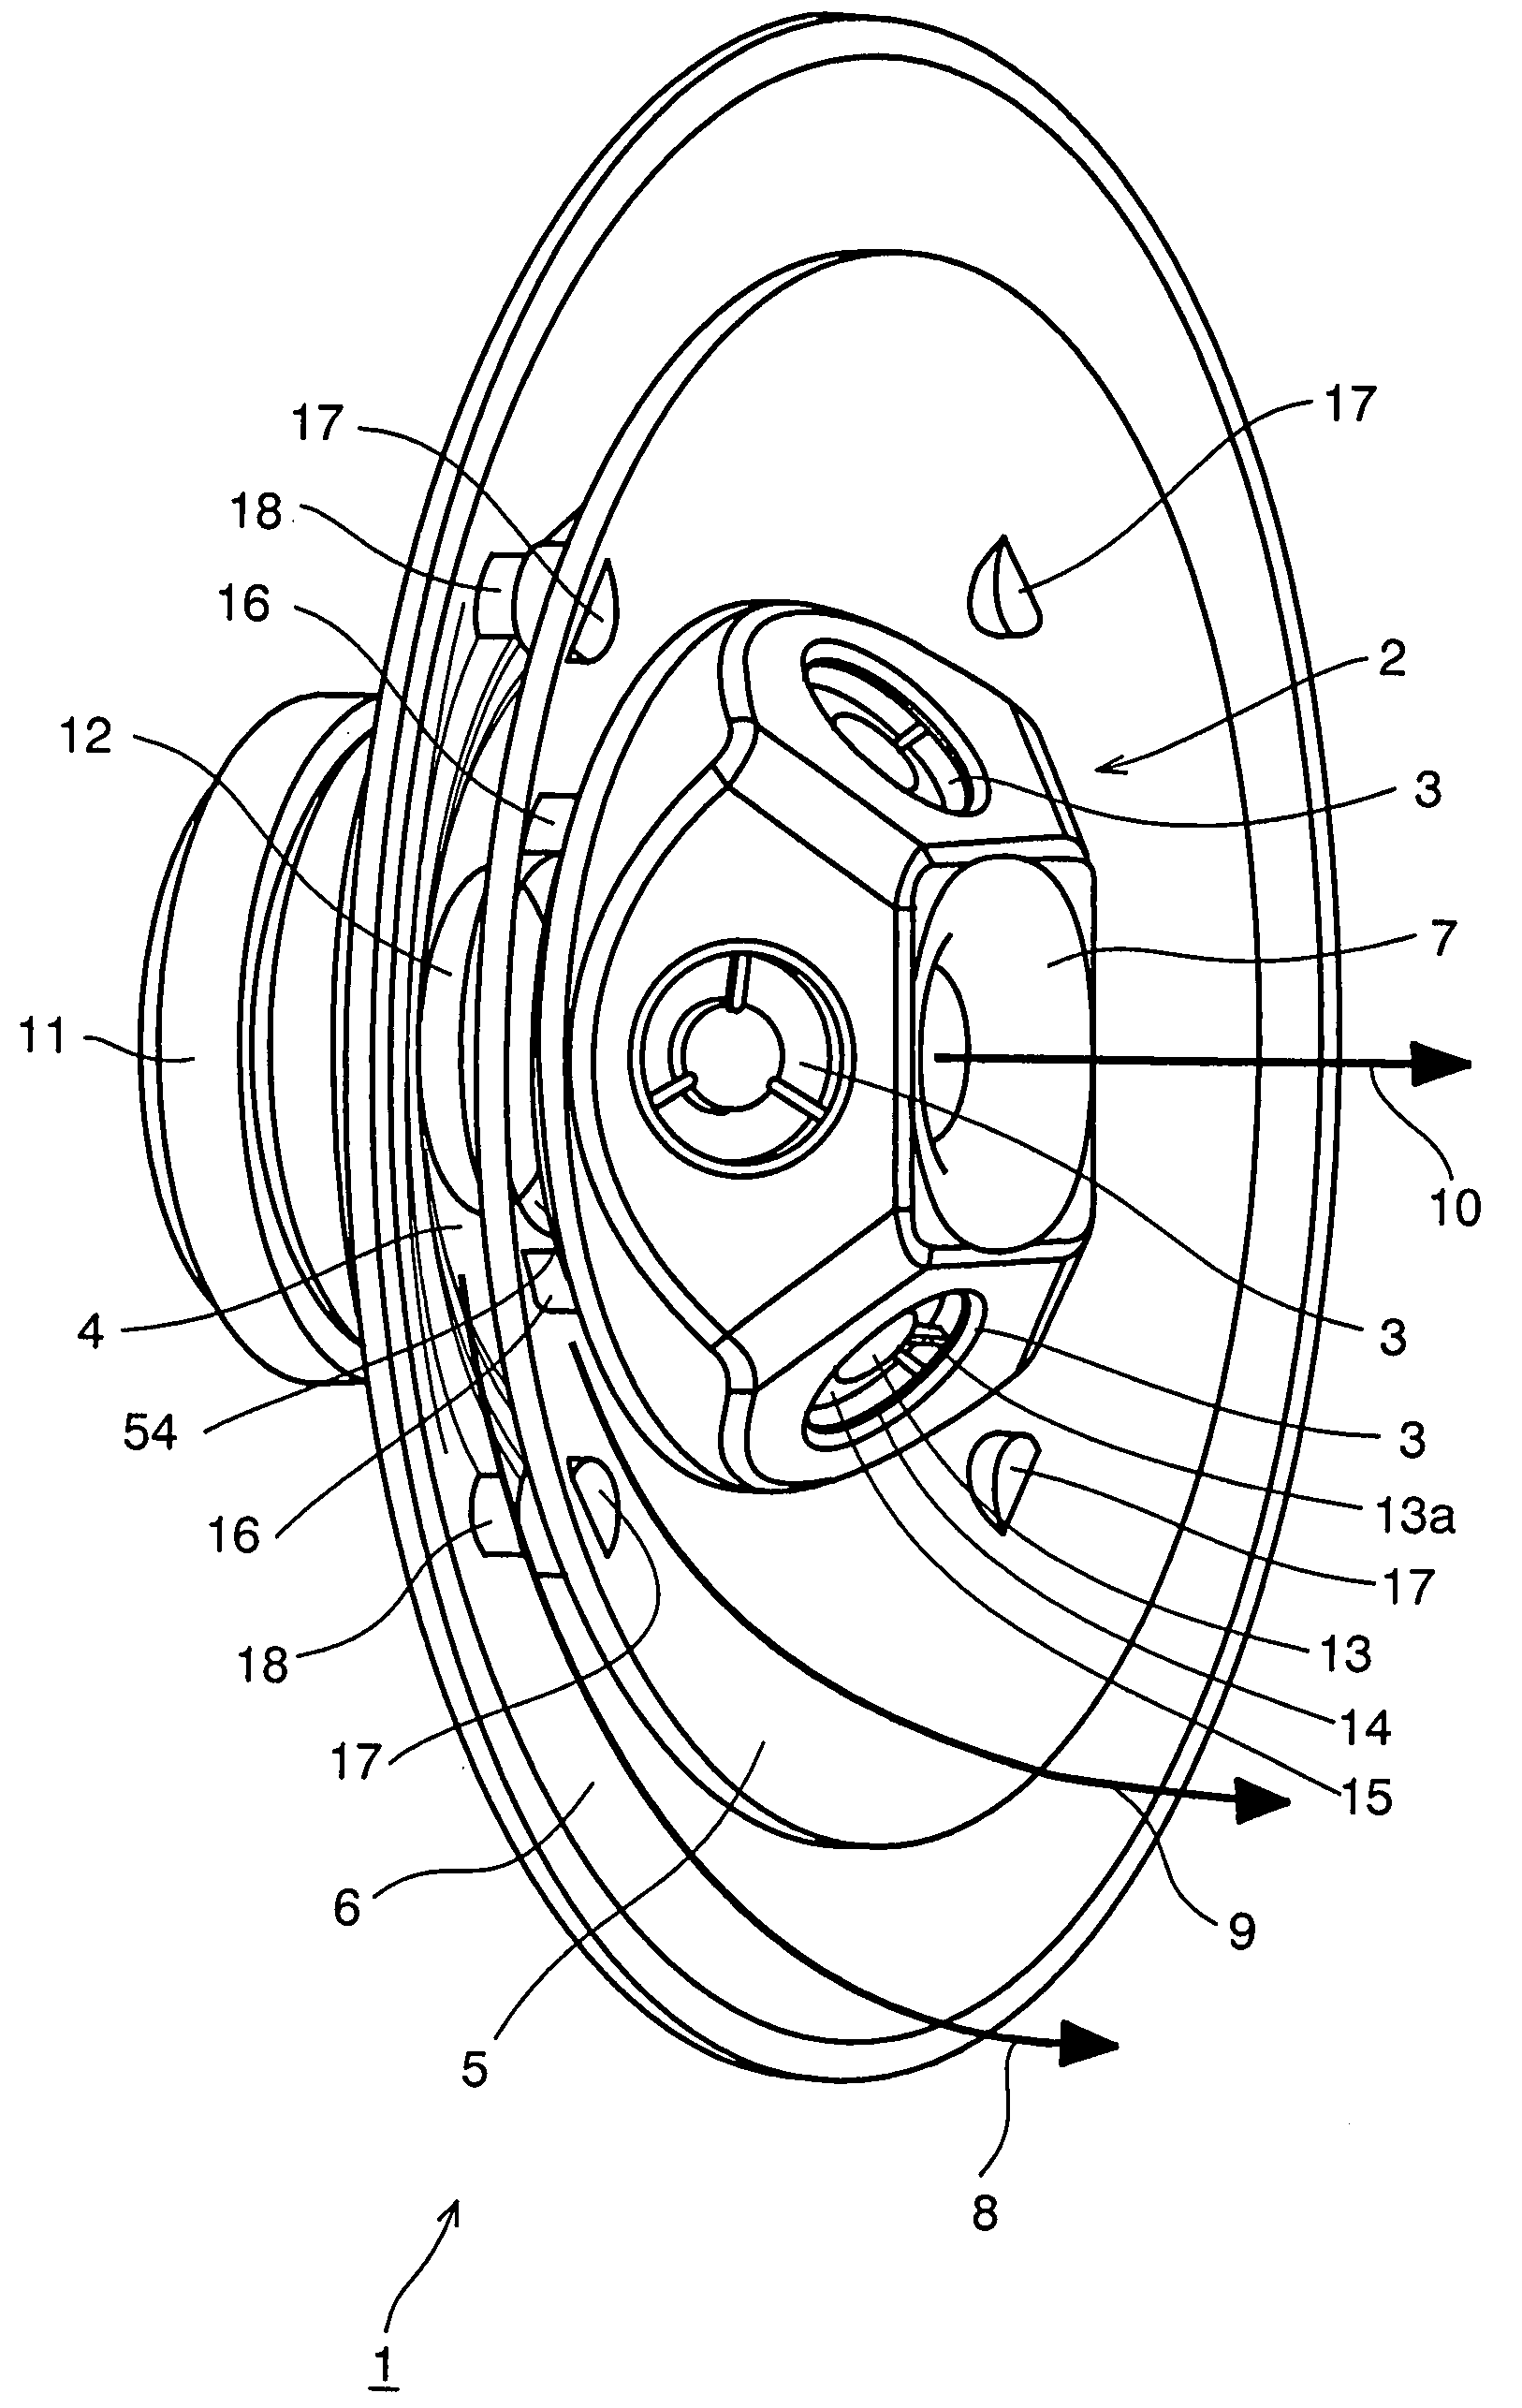 Speaker system with broad directivity